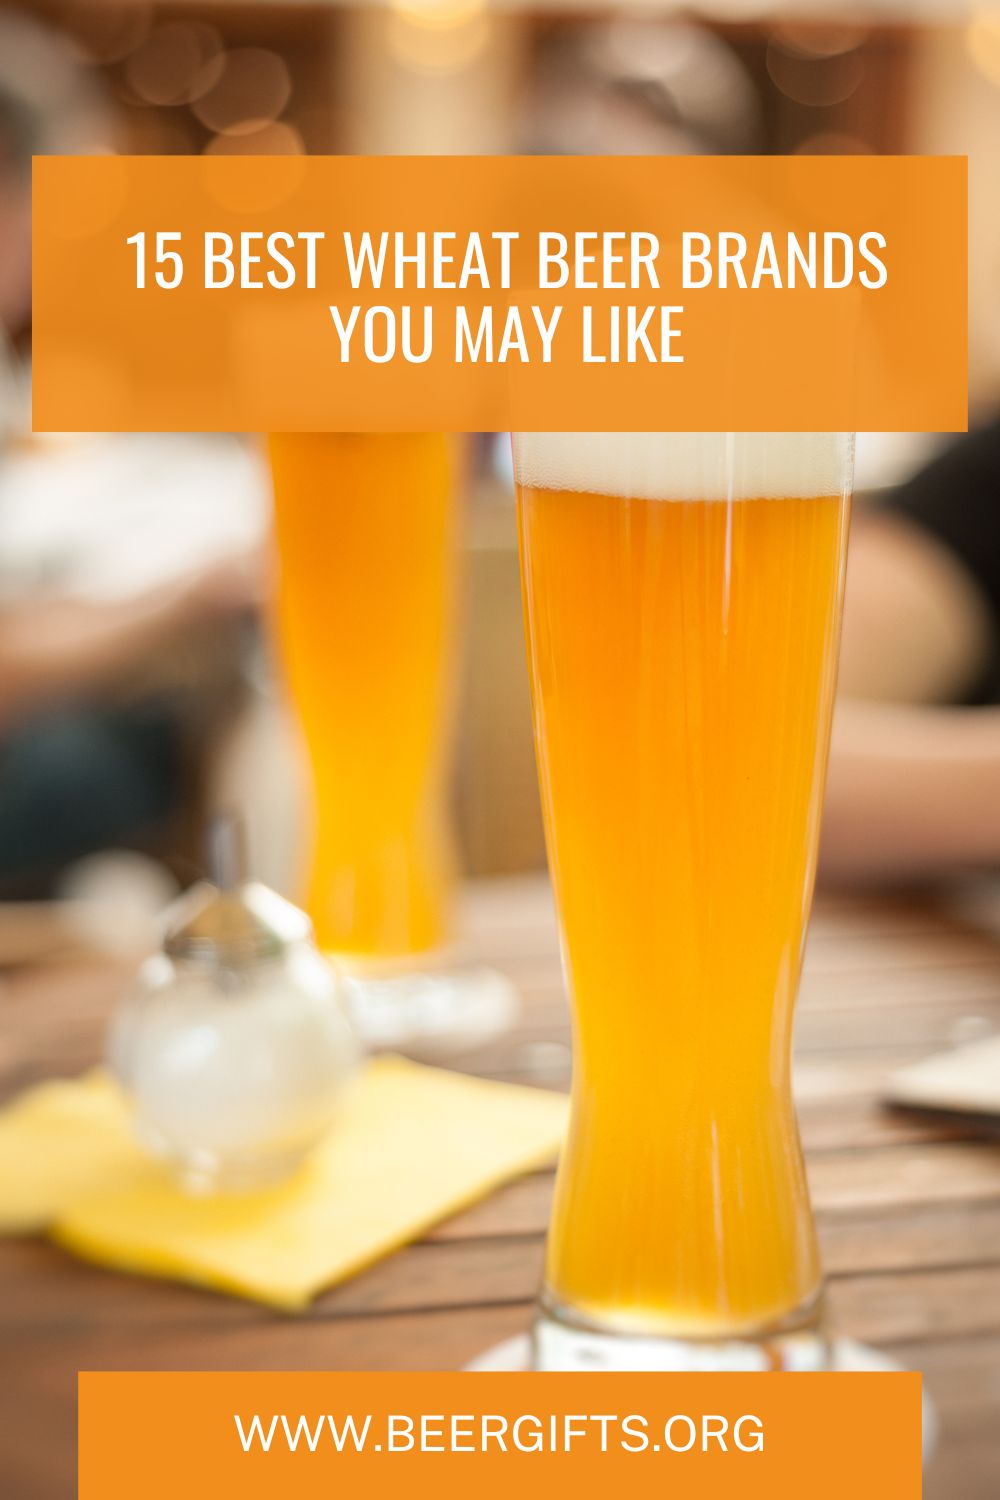 15 Best Wheat Beer Brands You May Like1